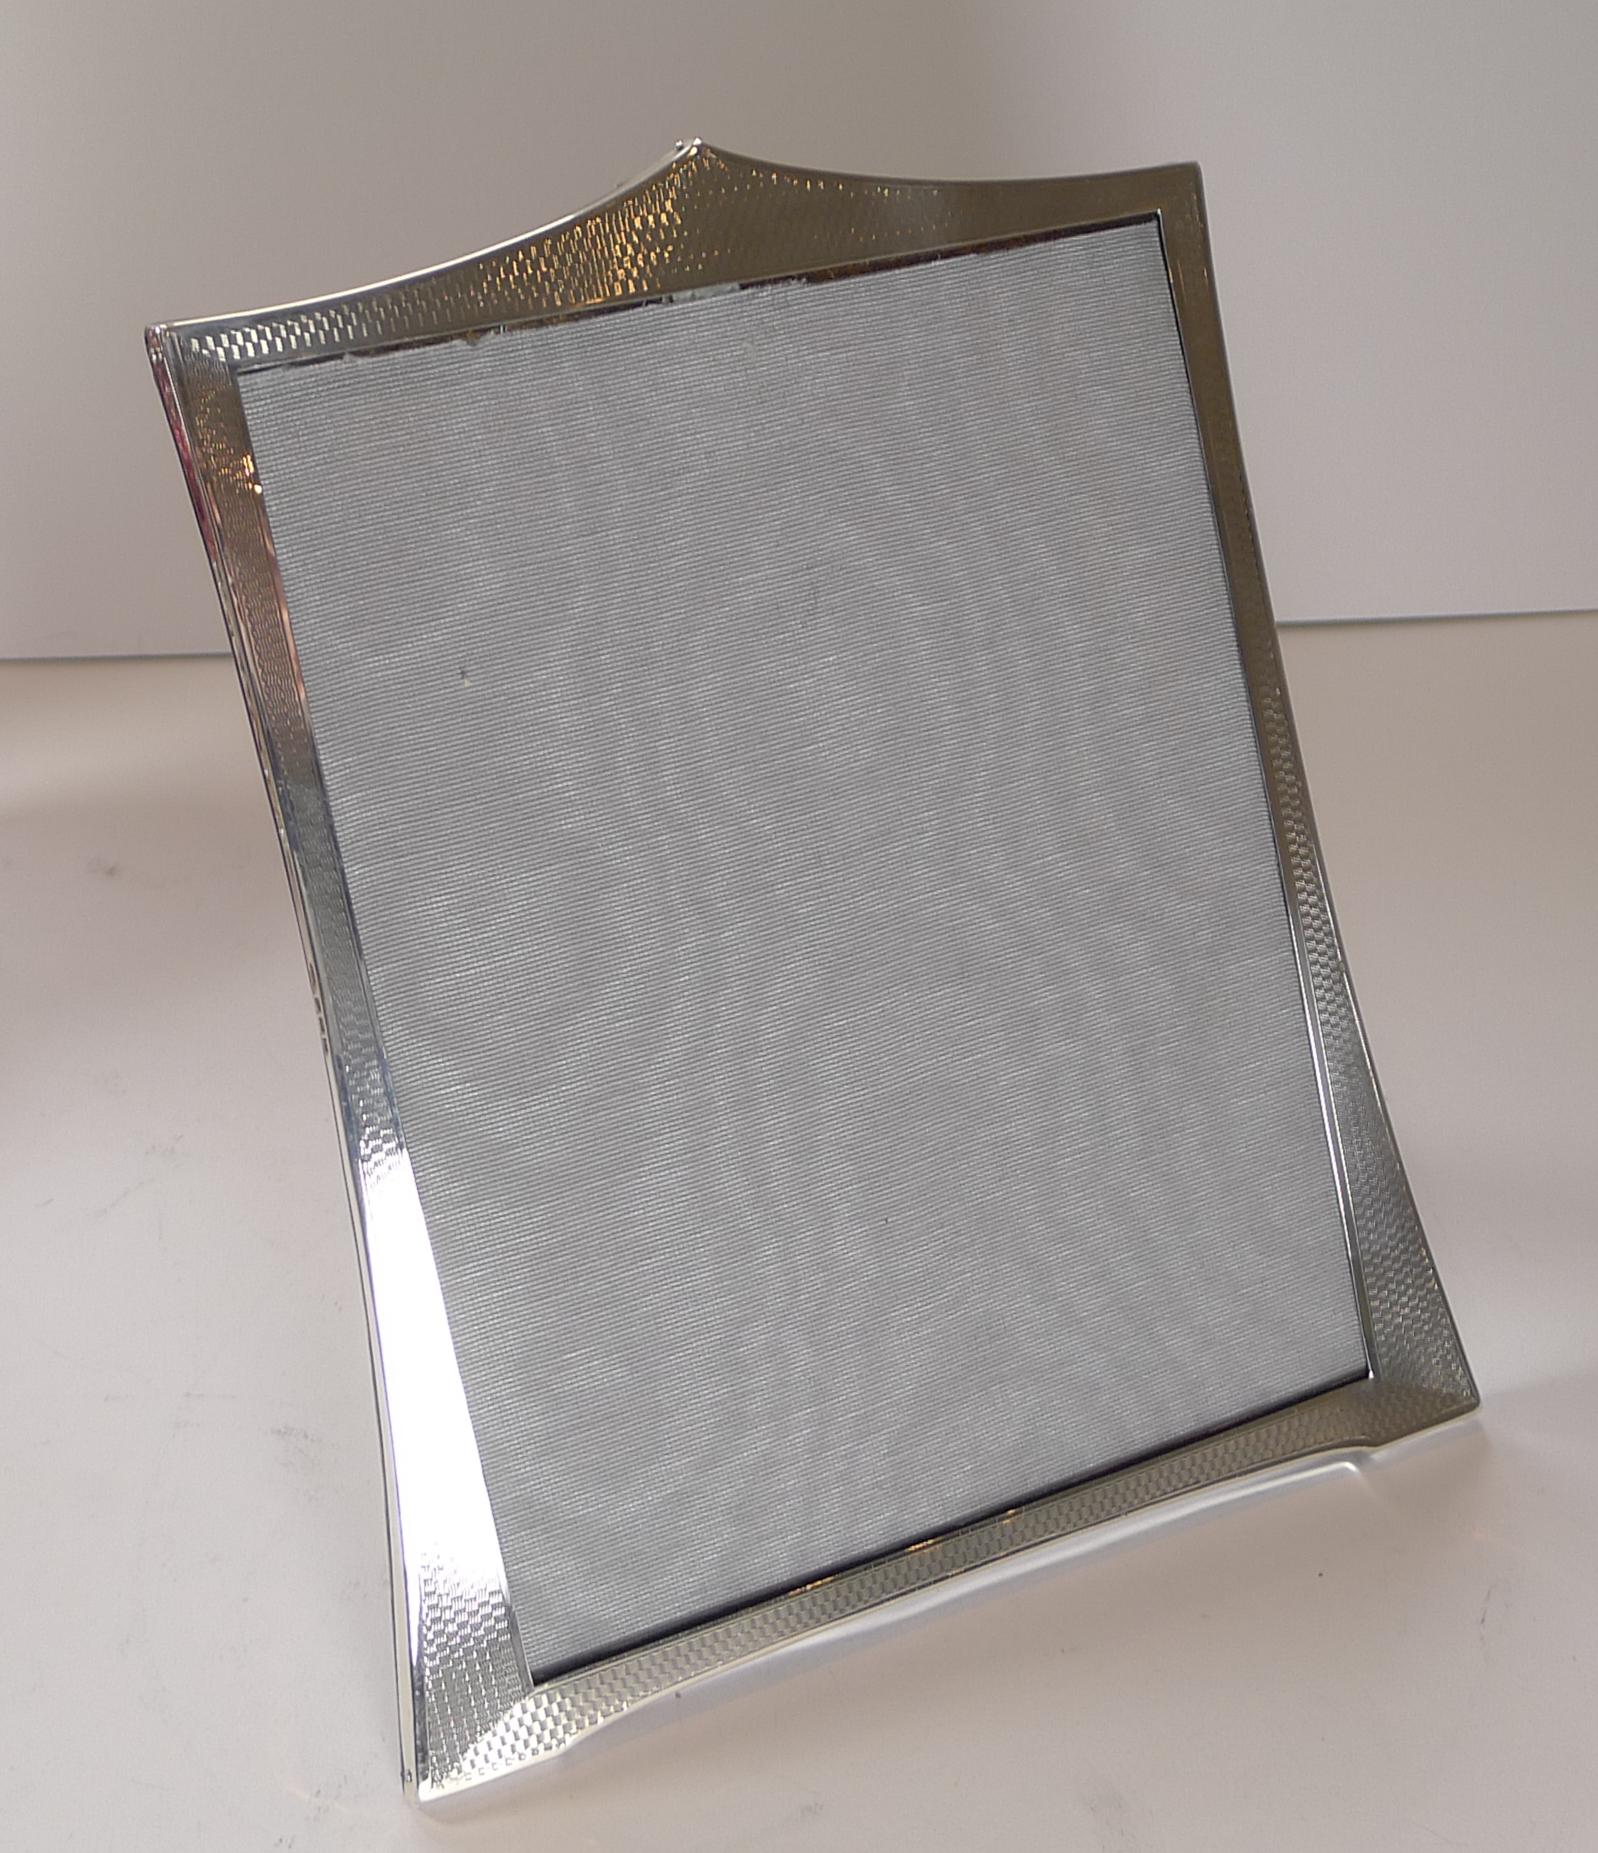 A handsome large Art Deco photograph frame, the silver having an all-over engine turned decoration. The silver is fully hallmarked for Birmingham 1928.

The back is made from solid oak with a hinged folding easel stand.

Excellent condition